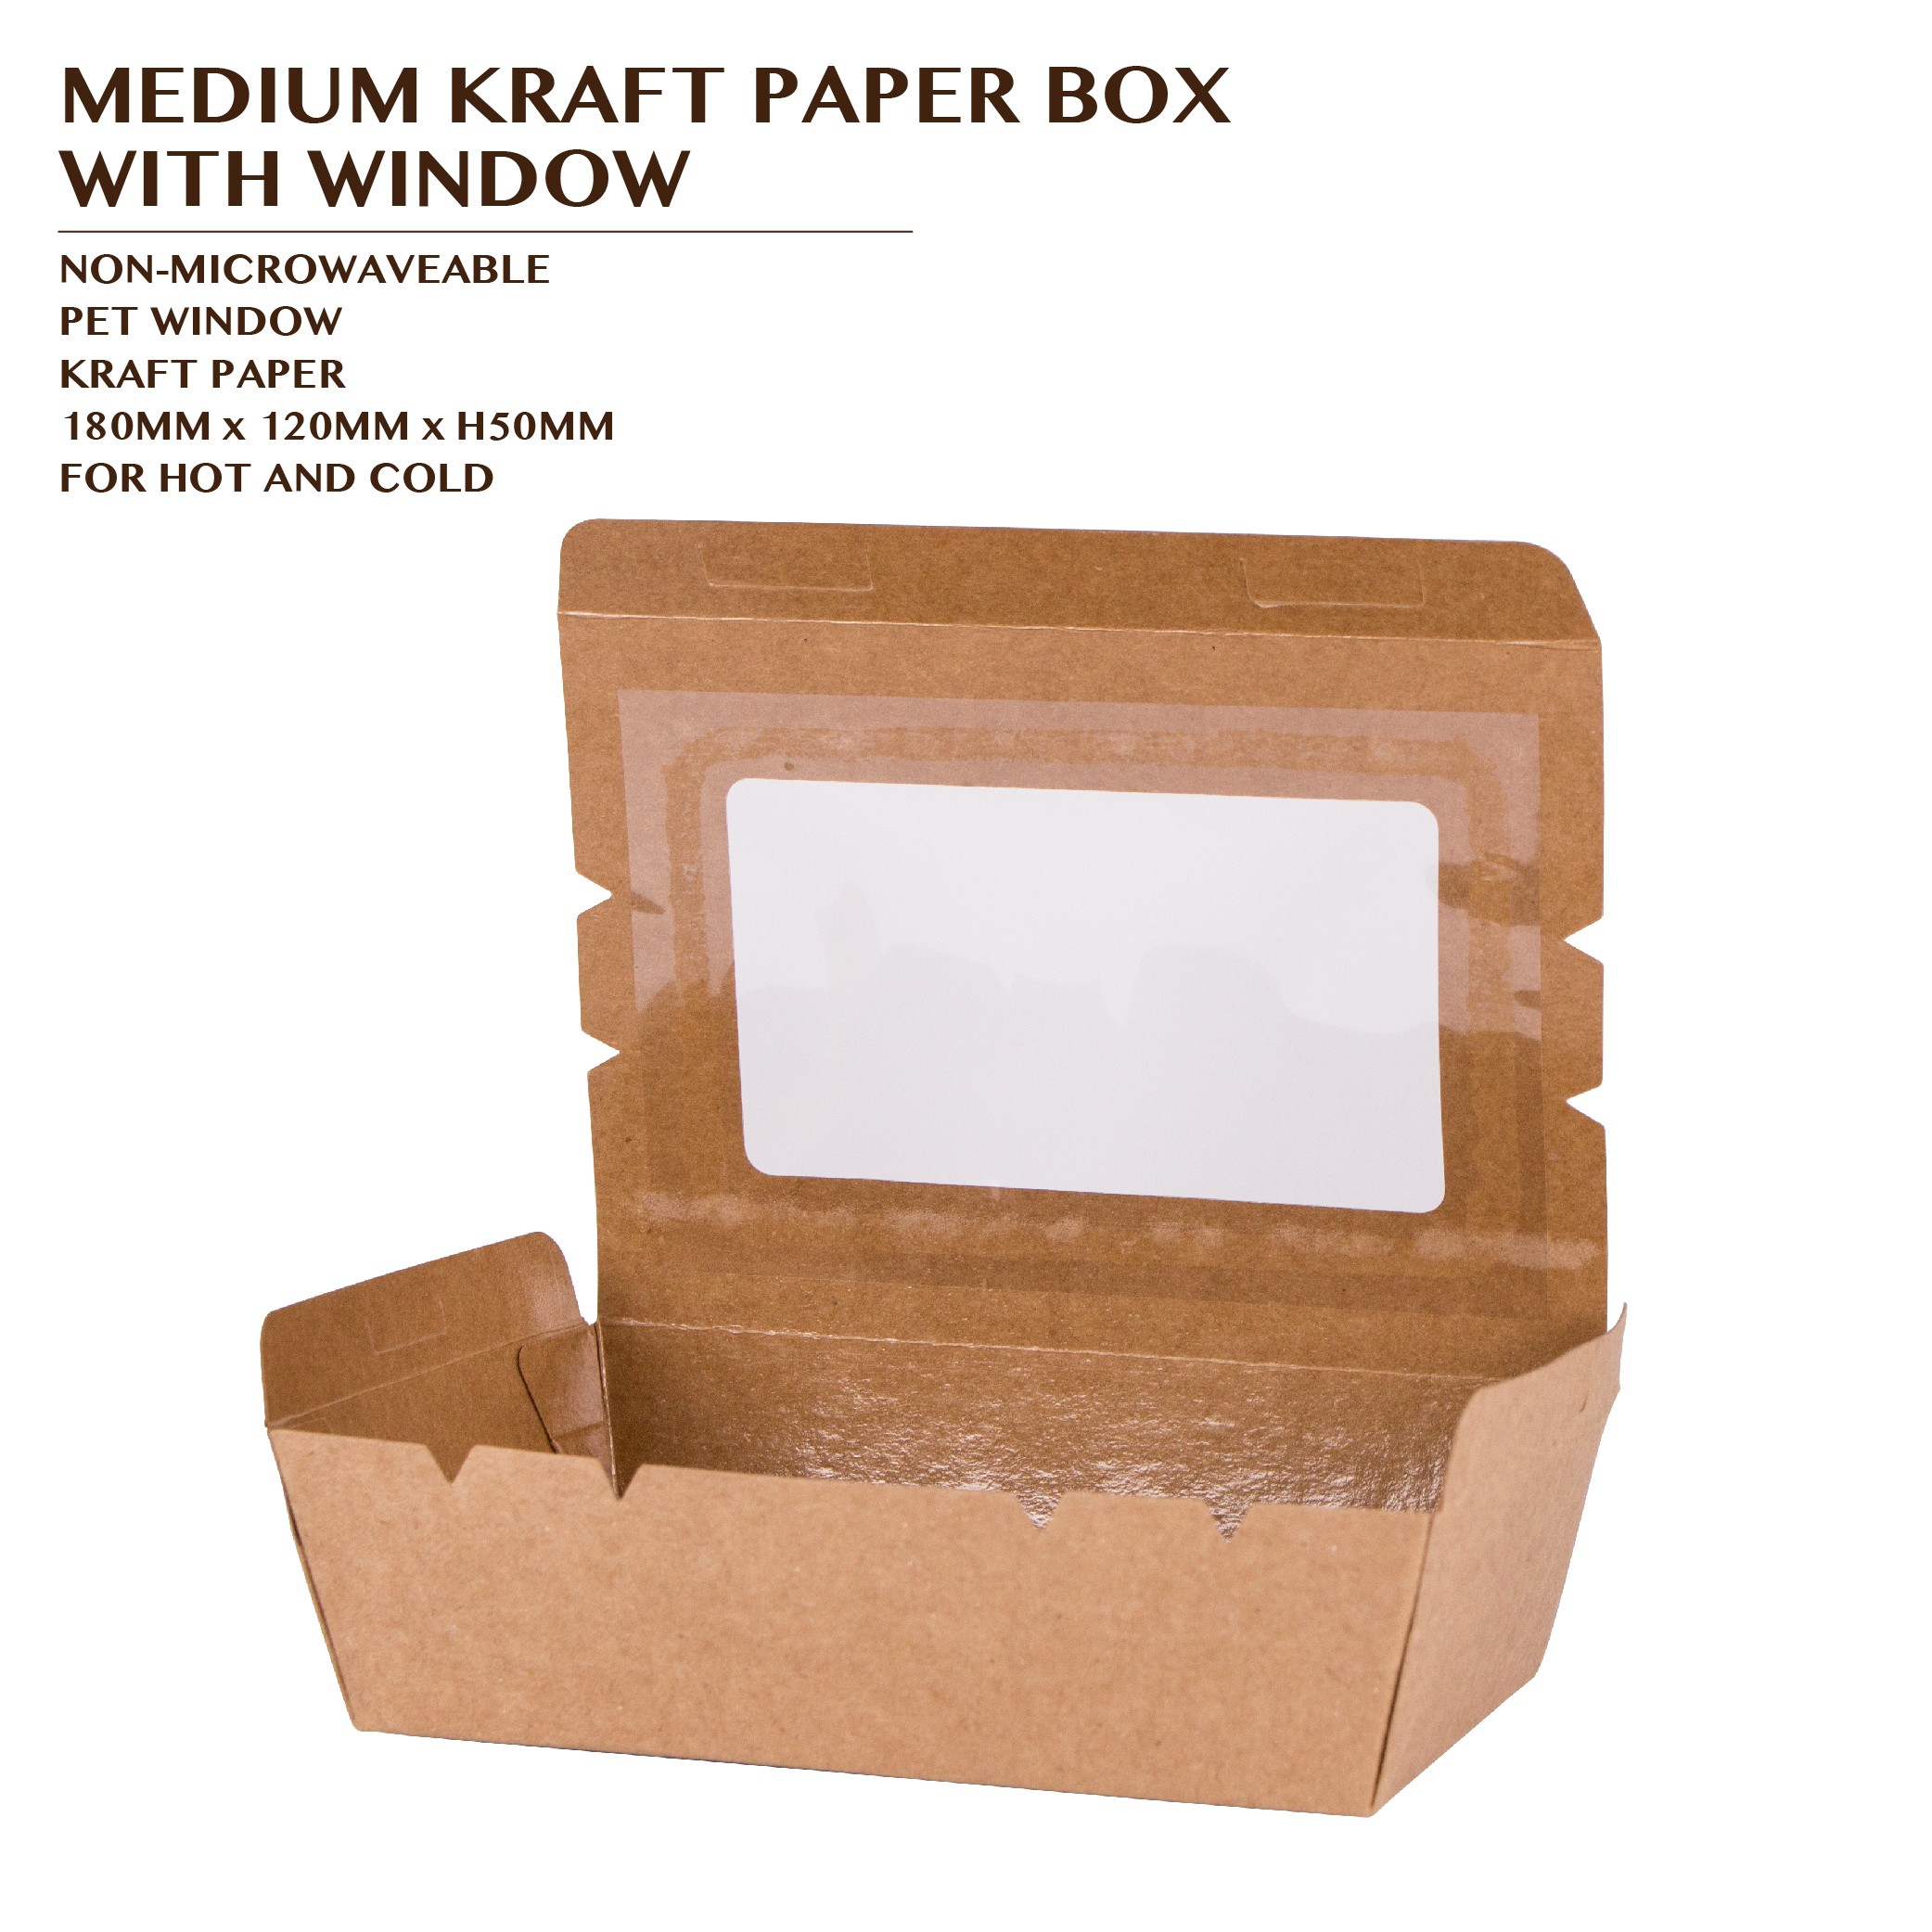 This wkrg246 kraft paper window box measures 3 3/4 x 7/8 x 5 3/16 and makes...